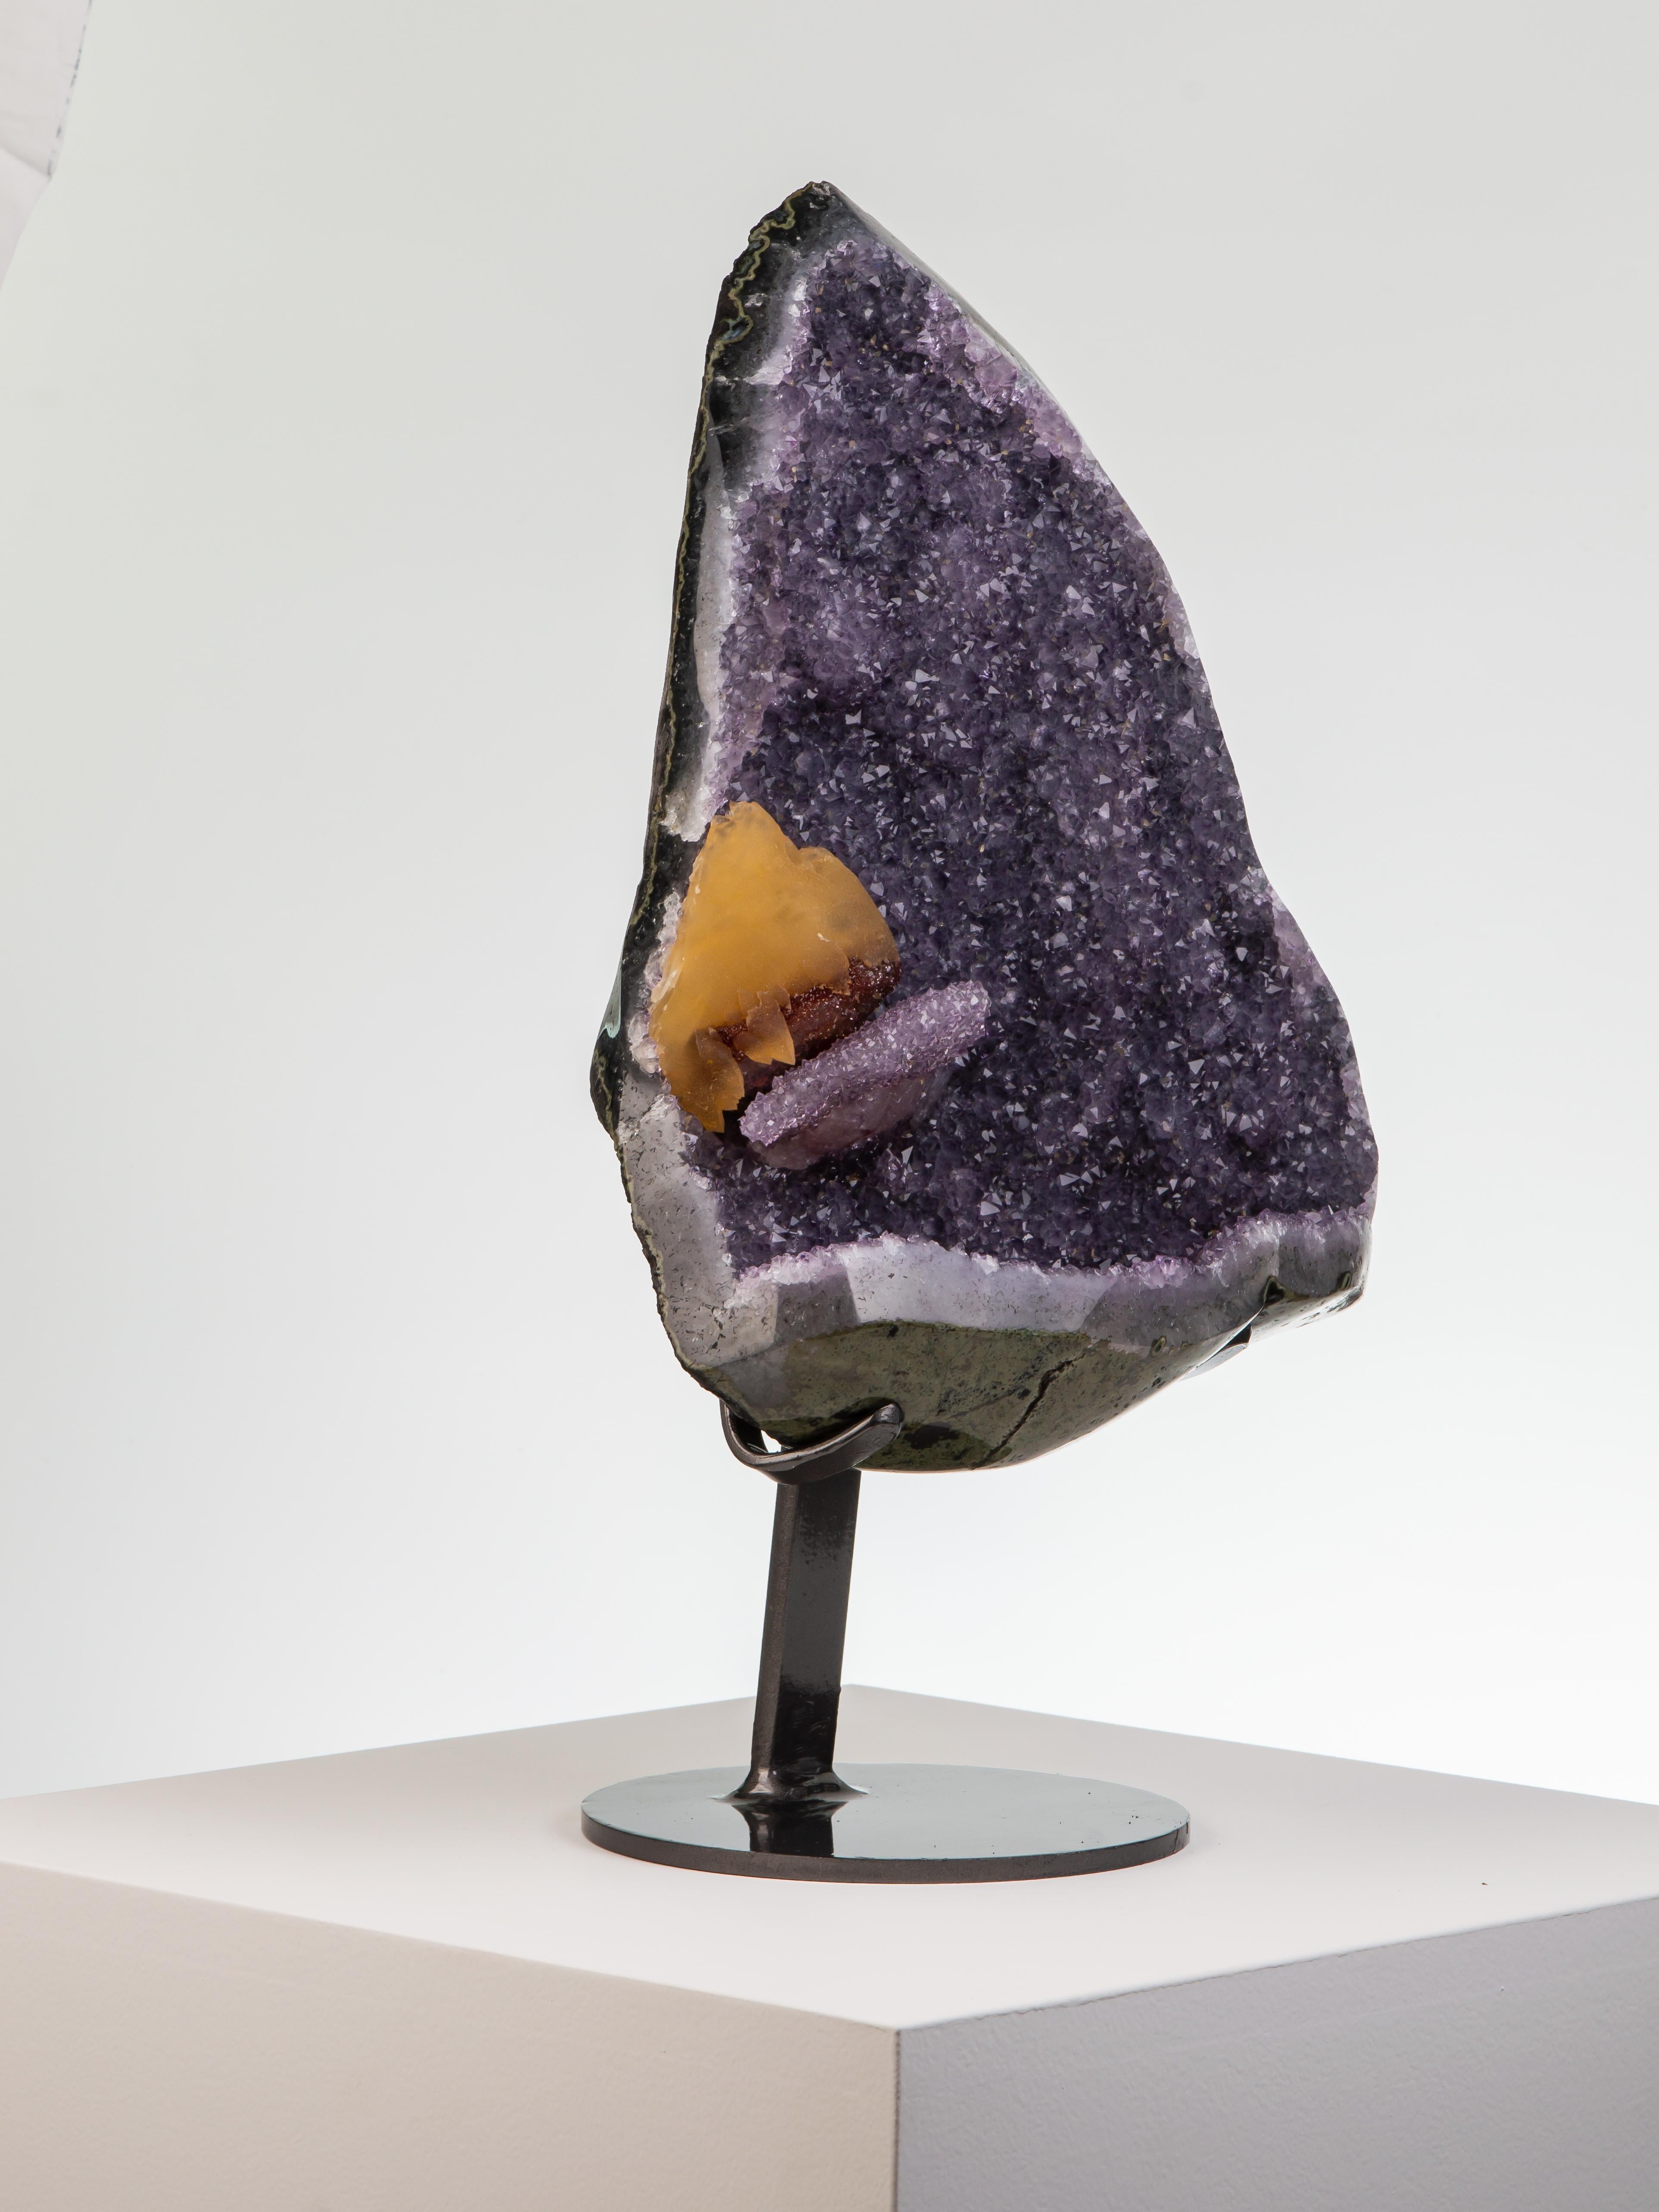 Uruguayan Triangular Geode Section with Perched Calcite For Sale